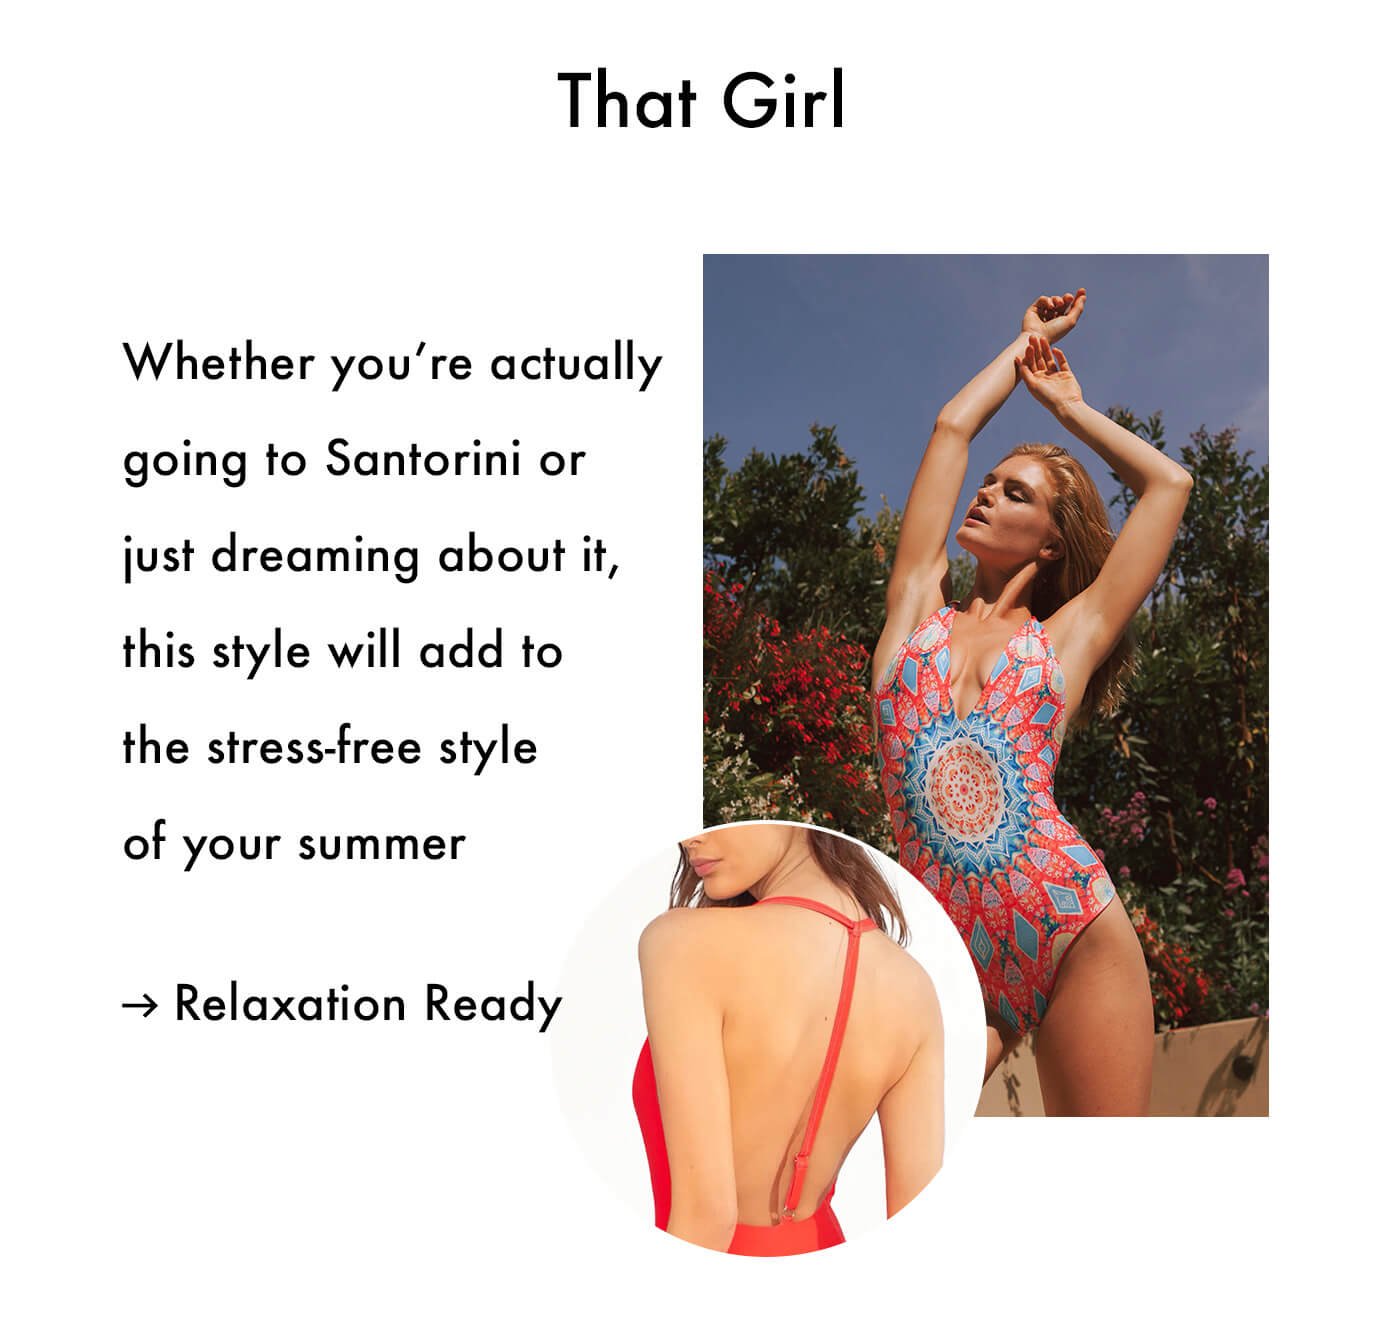 That Girl - Whether you’re actually going to Santorini or just dreaming about it, this style will add to the stress-free style of your summer - Relaxation Ready